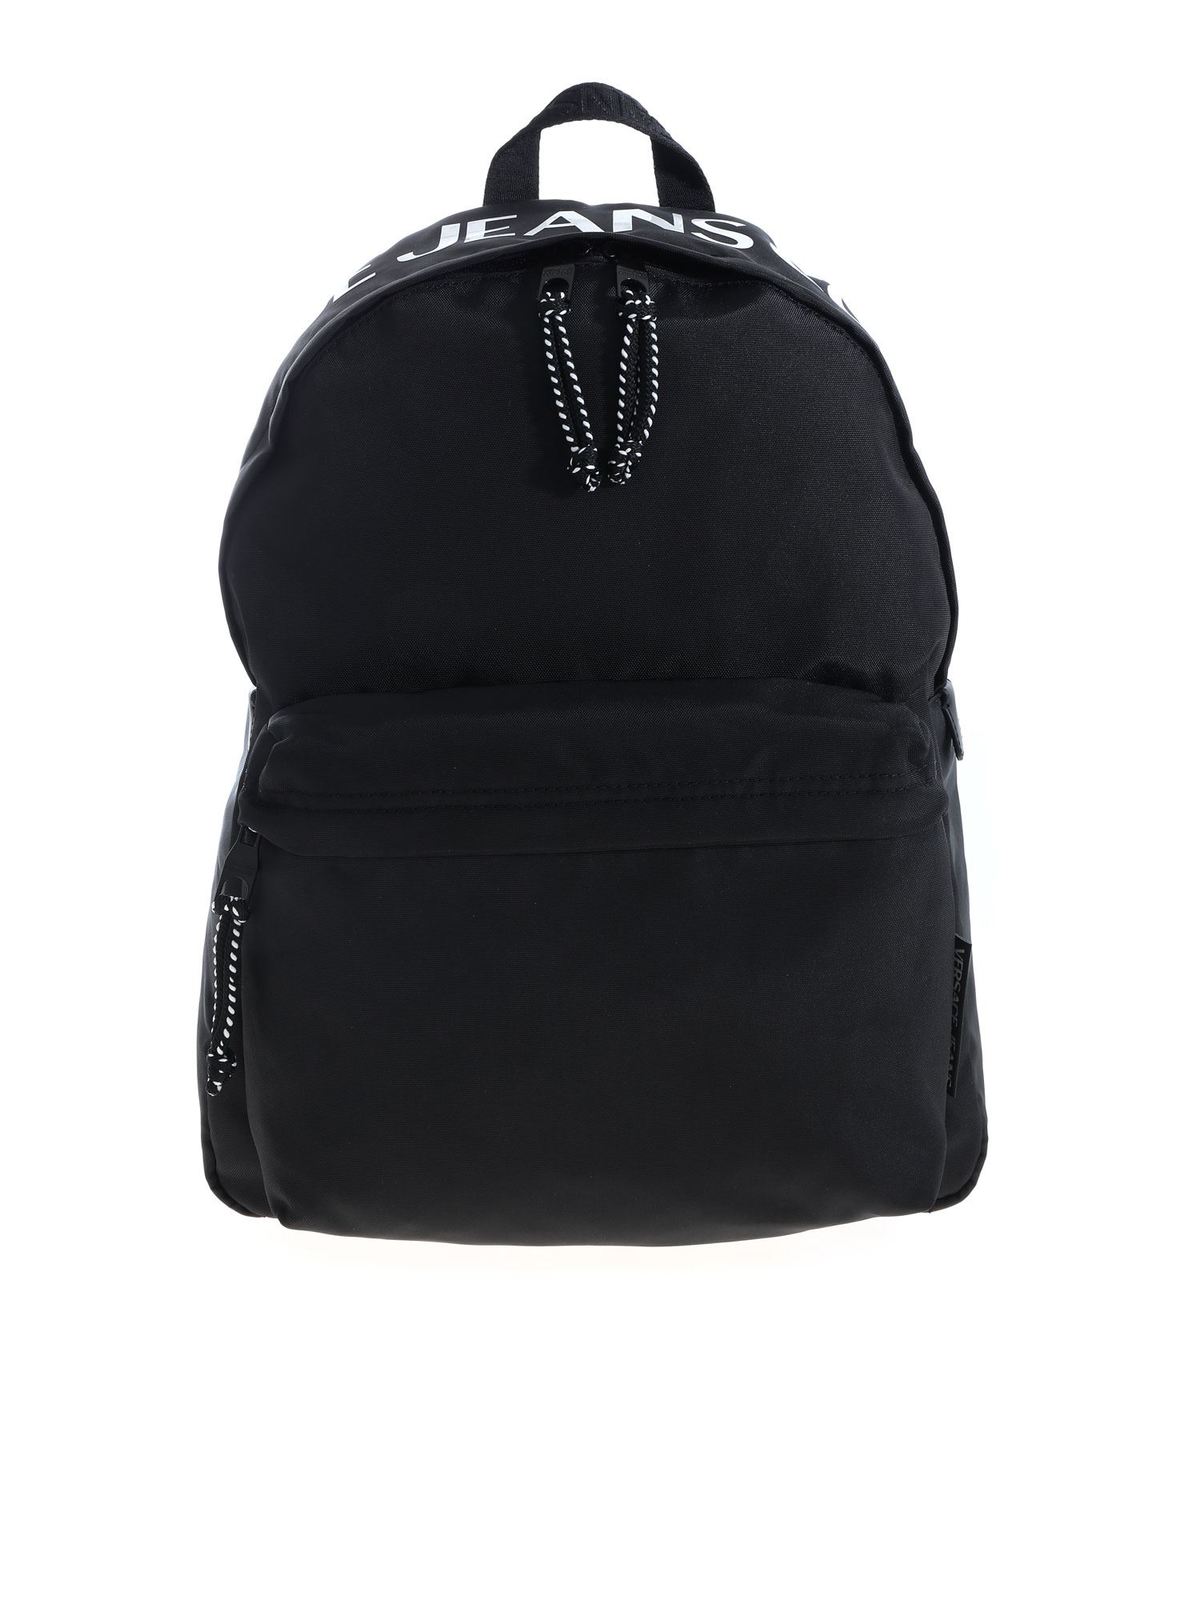 VERSACE JEANS COUTURE BACKPACK IN BLACK WITH WHITE LOGO PRINT